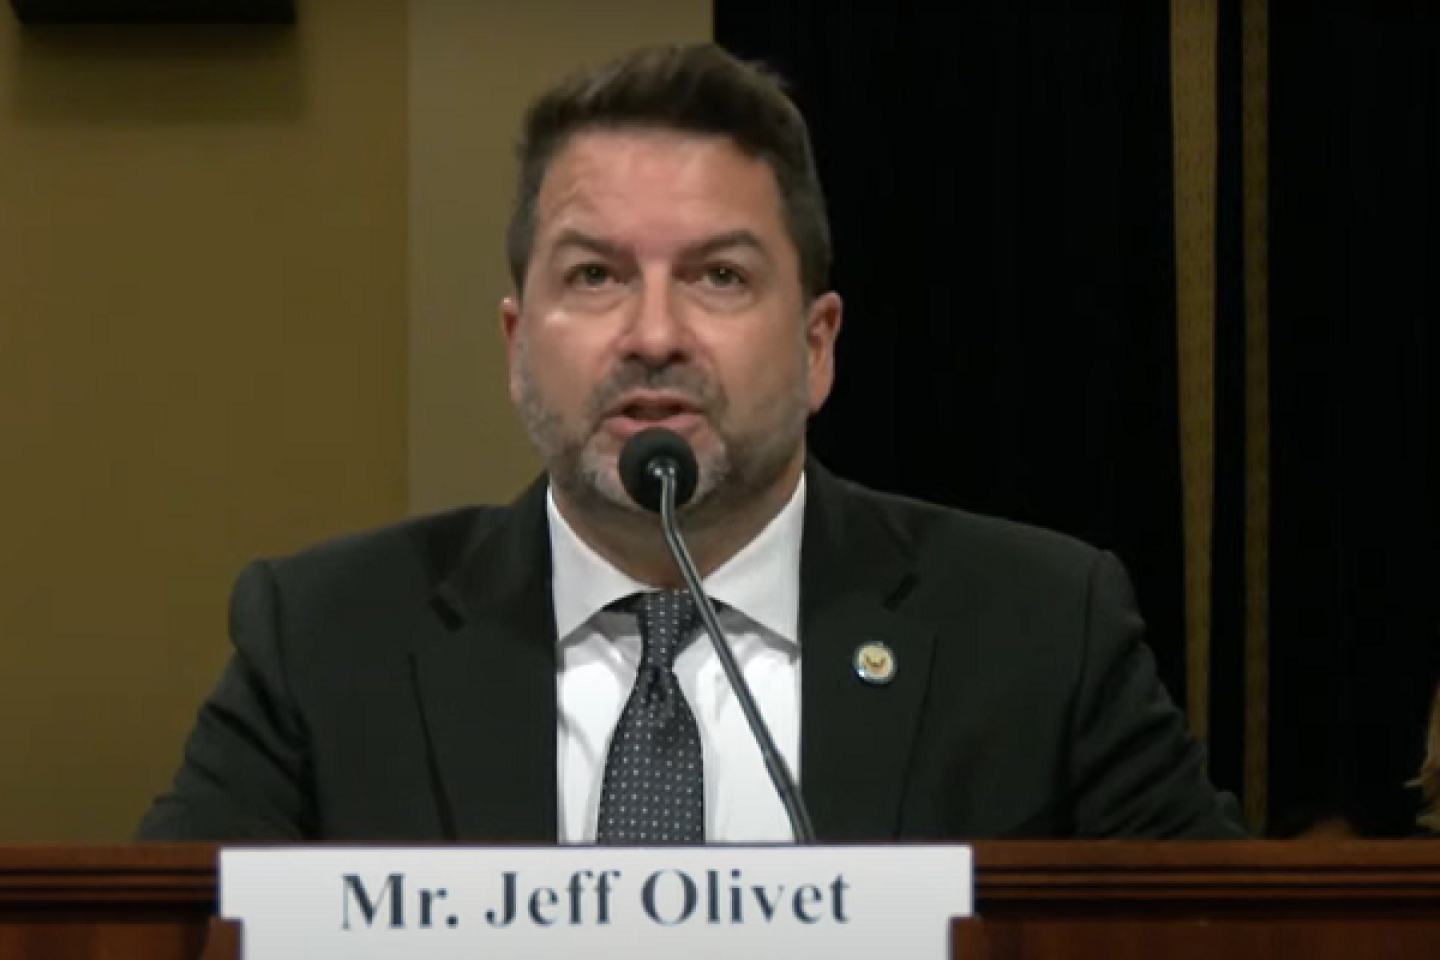 USICH Director Olivet testifying in front of Congress.